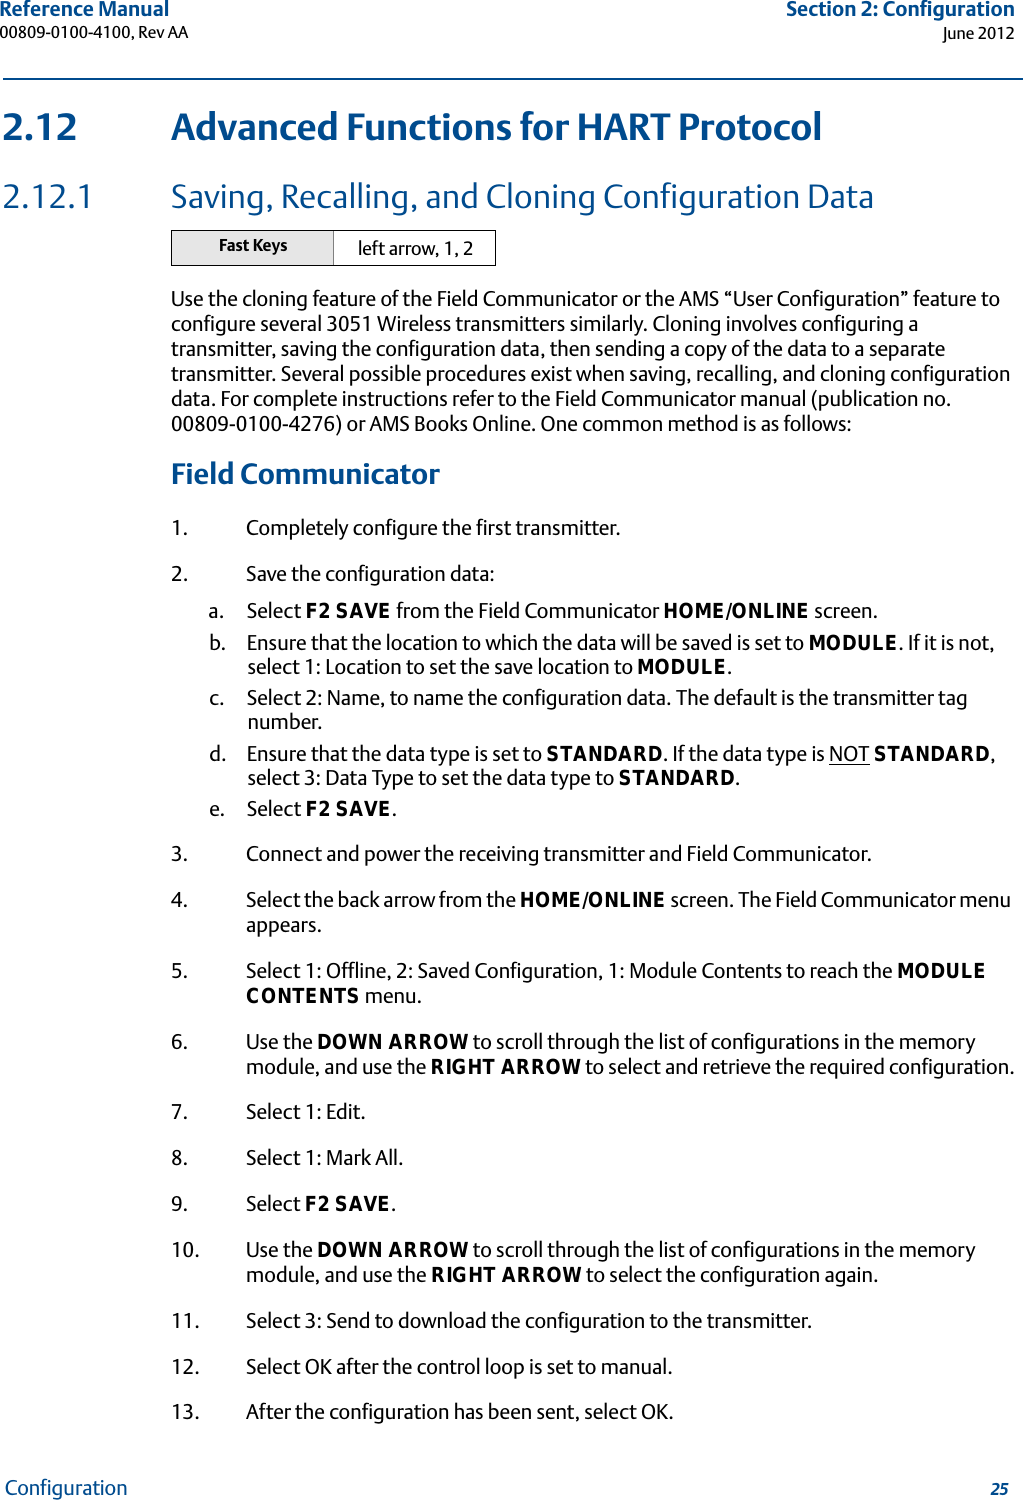 25Reference Manual 00809-0100-4100, Rev AASection 2: ConfigurationJune 2012Configuration2.12 Advanced Functions for HART Protocol2.12.1 Saving, Recalling, and Cloning Configuration DataUse the cloning feature of the Field Communicator or the AMS “User Configuration” feature to configure several 3051 Wireless transmitters similarly. Cloning involves configuring a transmitter, saving the configuration data, then sending a copy of the data to a separate transmitter. Several possible procedures exist when saving, recalling, and cloning configuration data. For complete instructions refer to the Field Communicator manual (publication no. 00809-0100-4276) or AMS Books Online. One common method is as follows:Field Communicator1. Completely configure the first transmitter.2. Save the configuration data:a. Select F2 SAVE from the Field Communicator HOME/ONLINE screen.b. Ensure that the location to which the data will be saved is set to MODULE. If it is not, select 1: Location to set the save location to MODULE.c. Select 2: Name, to name the configuration data. The default is the transmitter tag number.d. Ensure that the data type is set to STANDARD. If the data type is NOT STANDARD, select 3: Data Type to set the data type to STANDARD.e. Select F2 SAVE.3. Connect and power the receiving transmitter and Field Communicator.4. Select the back arrow from the HOME/ONLINE screen. The Field Communicator menu appears.5. Select 1: Offline, 2: Saved Configuration, 1: Module Contents to reach the MODULE CONTENTS menu.6. Use the DOWN ARROW to scroll through the list of configurations in the memory module, and use the RIGHT ARROW to select and retrieve the required configuration.7. Select 1: Edit.8. Select 1: Mark All.9. Select F2 SAVE.10. Use the DOWN ARROW to scroll through the list of configurations in the memory module, and use the RIGHT ARROW to select the configuration again.11. Select 3: Send to download the configuration to the transmitter.12. Select OK after the control loop is set to manual.13. After the configuration has been sent, select OK.Fast Keys left arrow, 1, 2